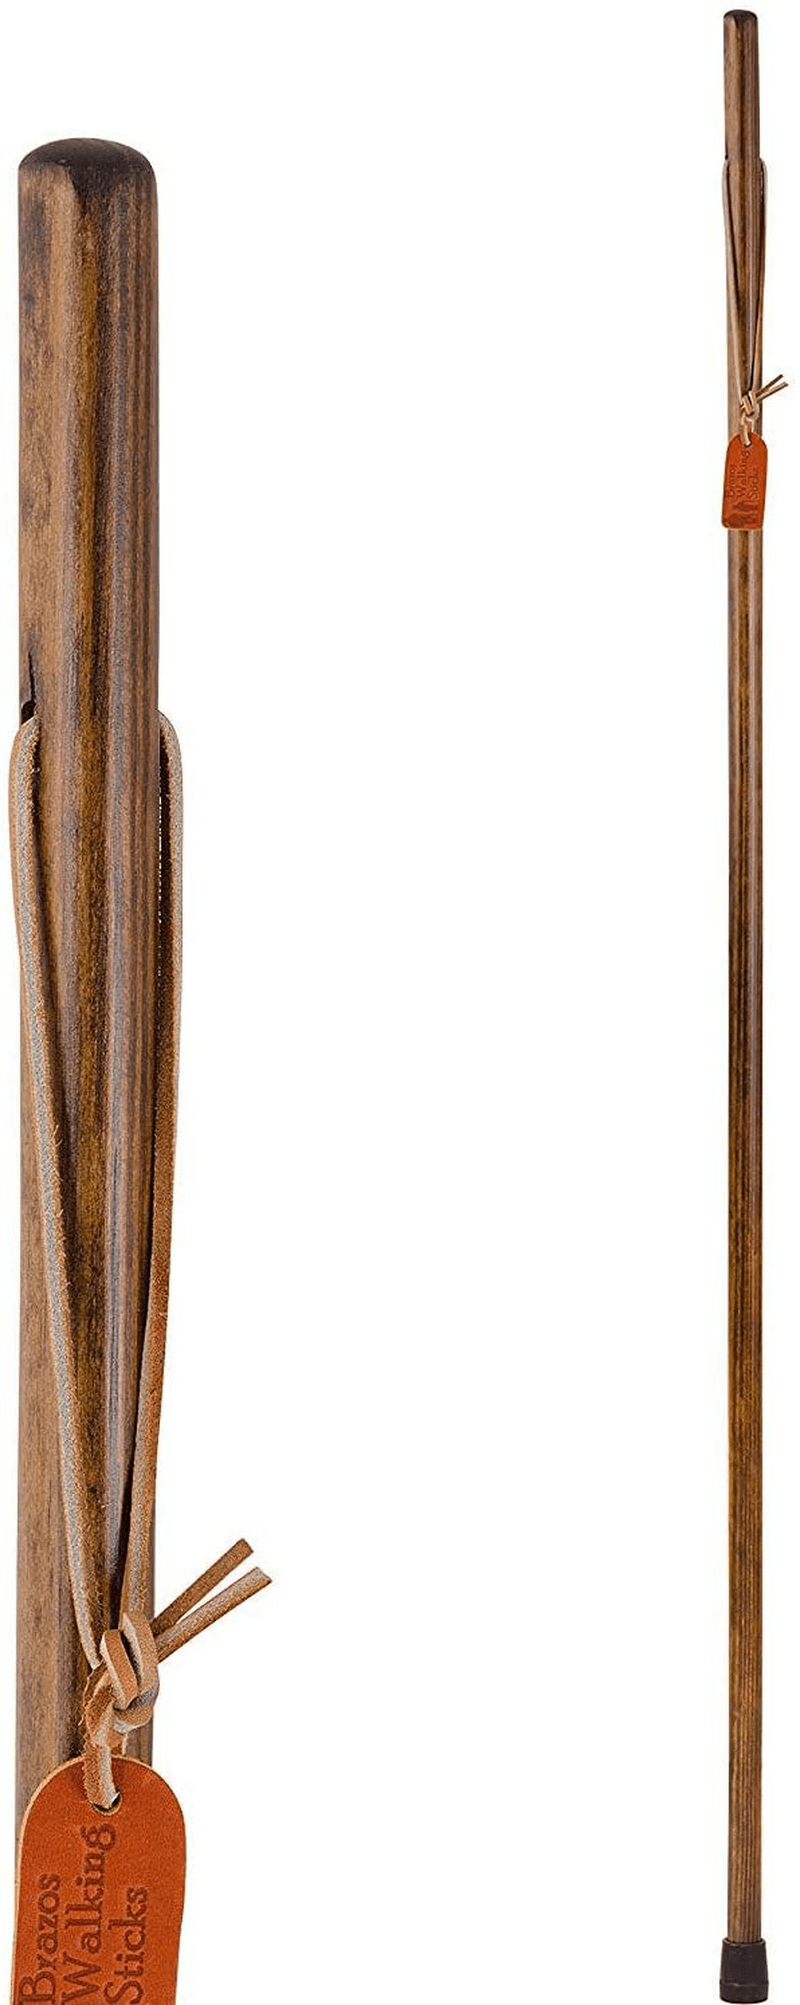 Brazos Straight Pine Wood Walking Stick, Handcrafted Wooden Staff, Hiking Stick for Men and Women, Trekking Pole, Wooden Walking Stick, Made in the USA, 48 Inches